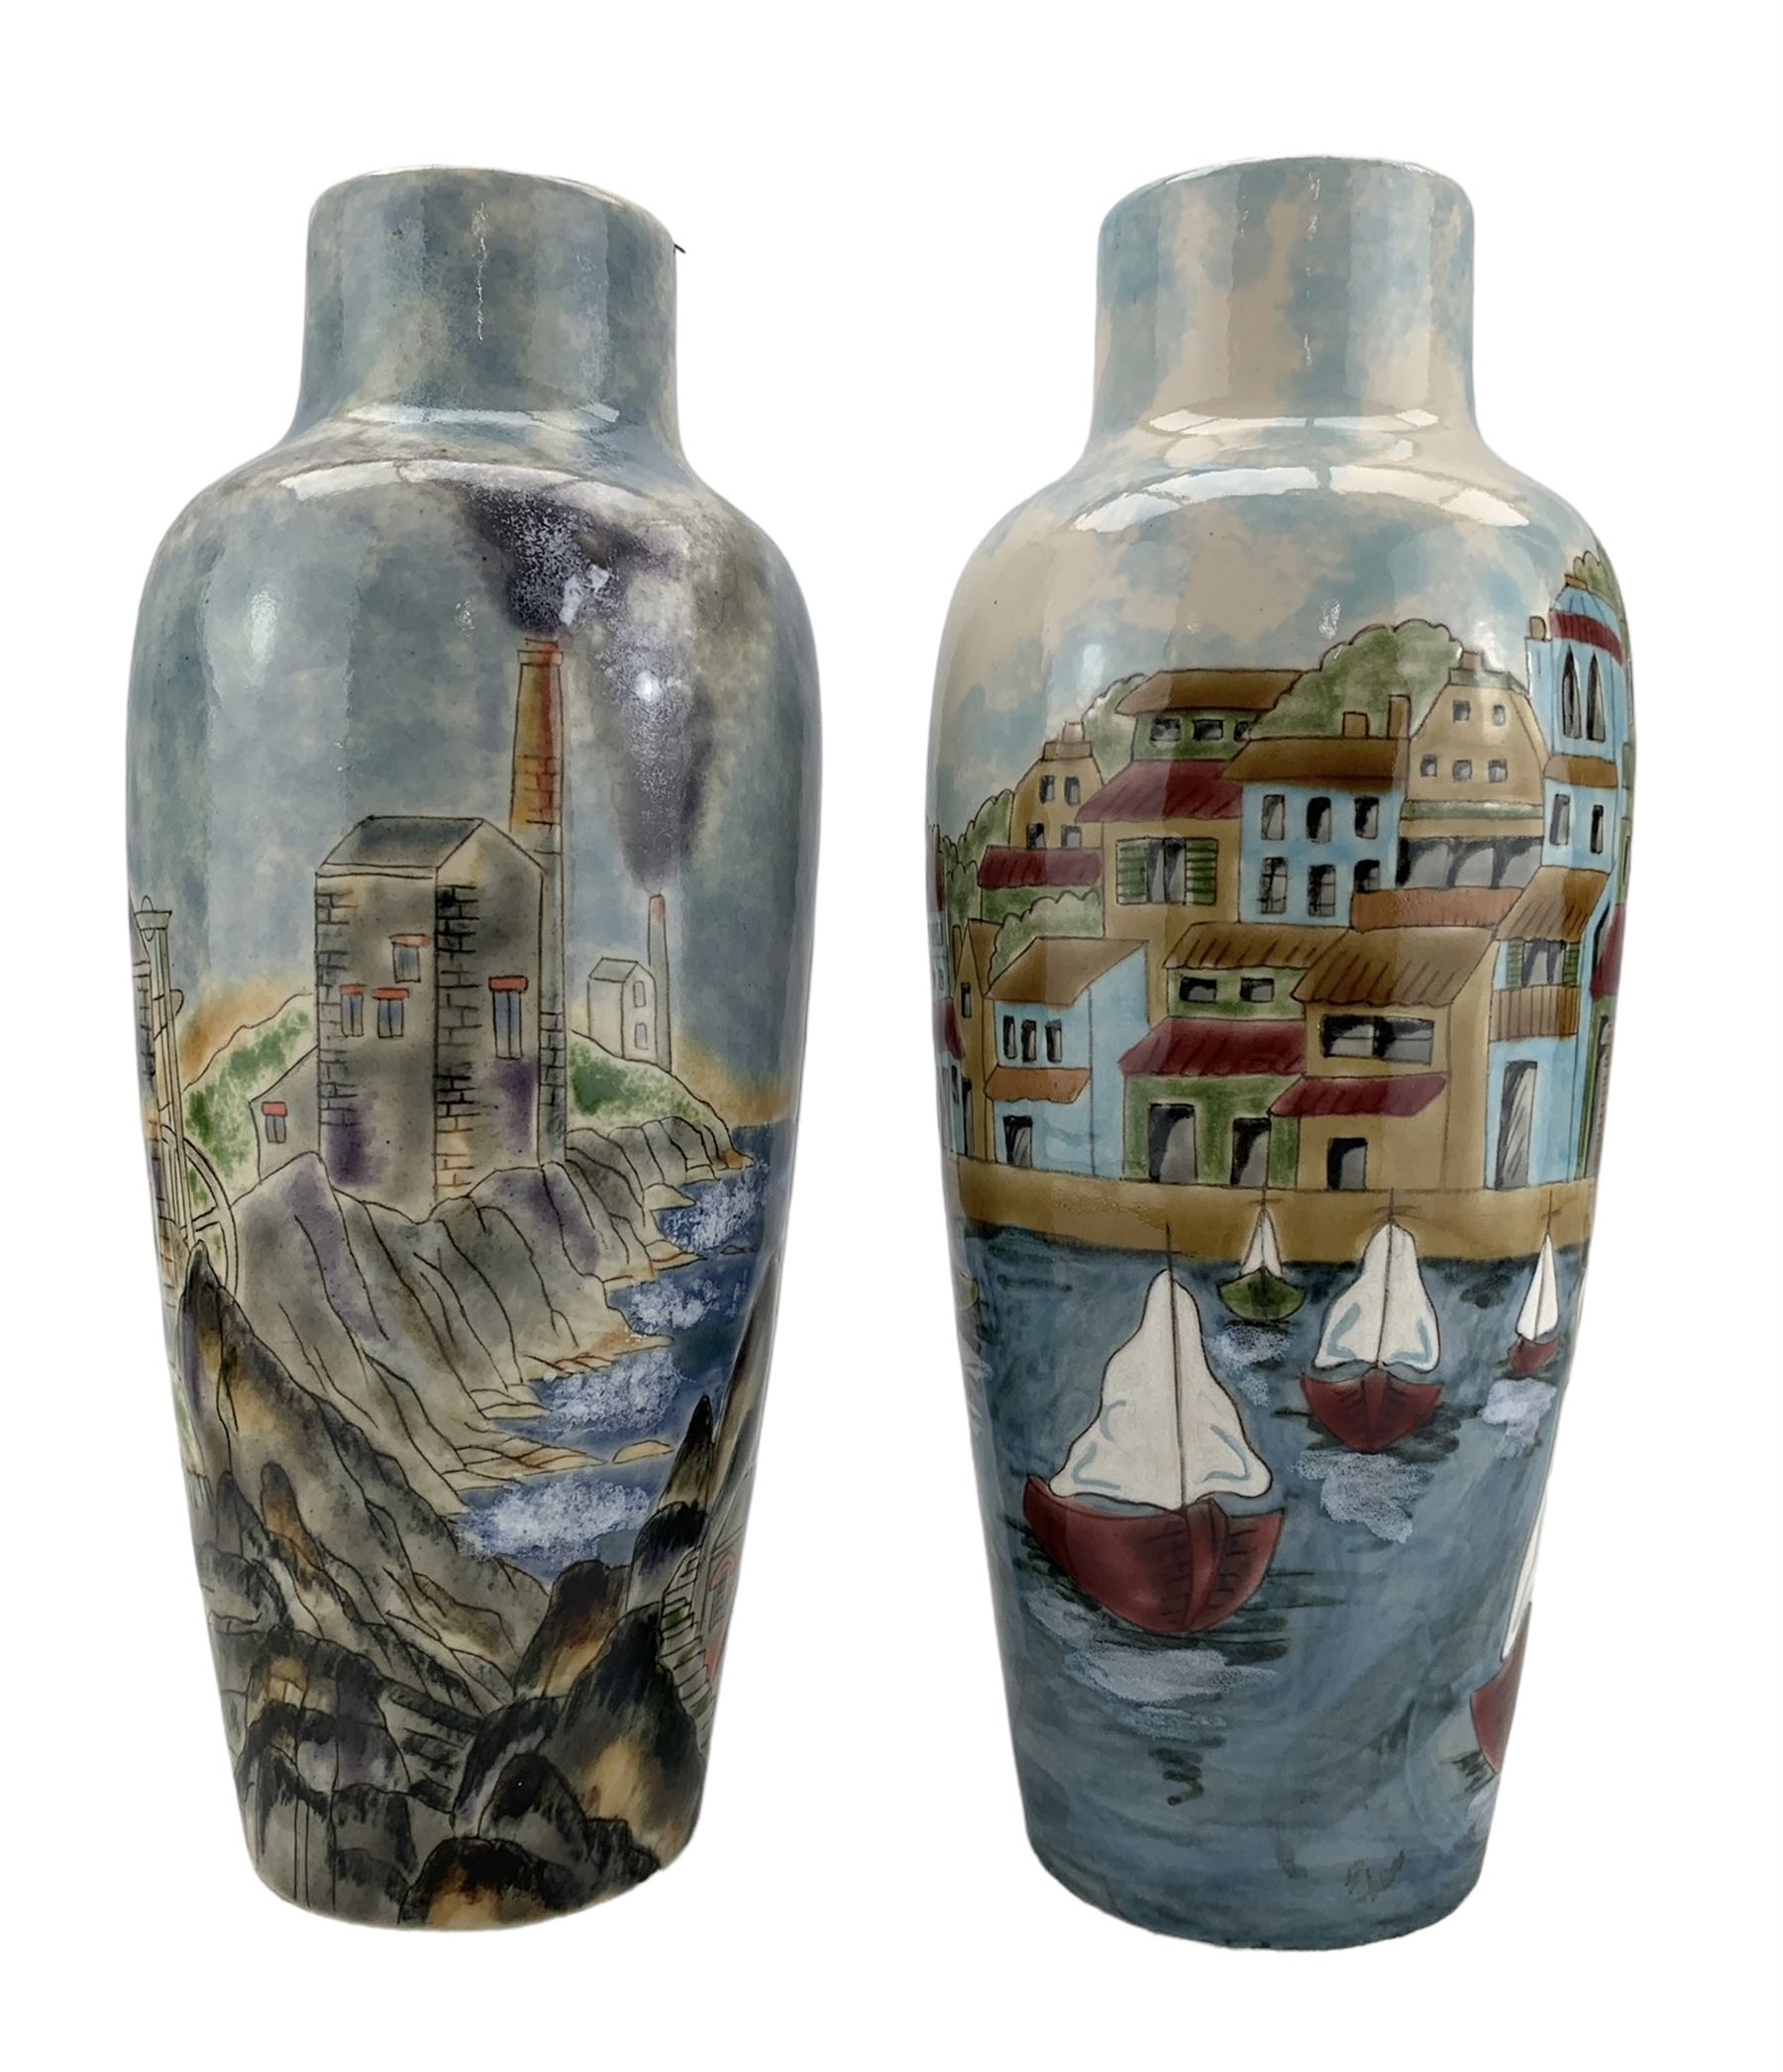 Cobridge limited edition pottery vase in the 'Riviera' pattern by Nicola Slaney 65/150 H26cm and ano